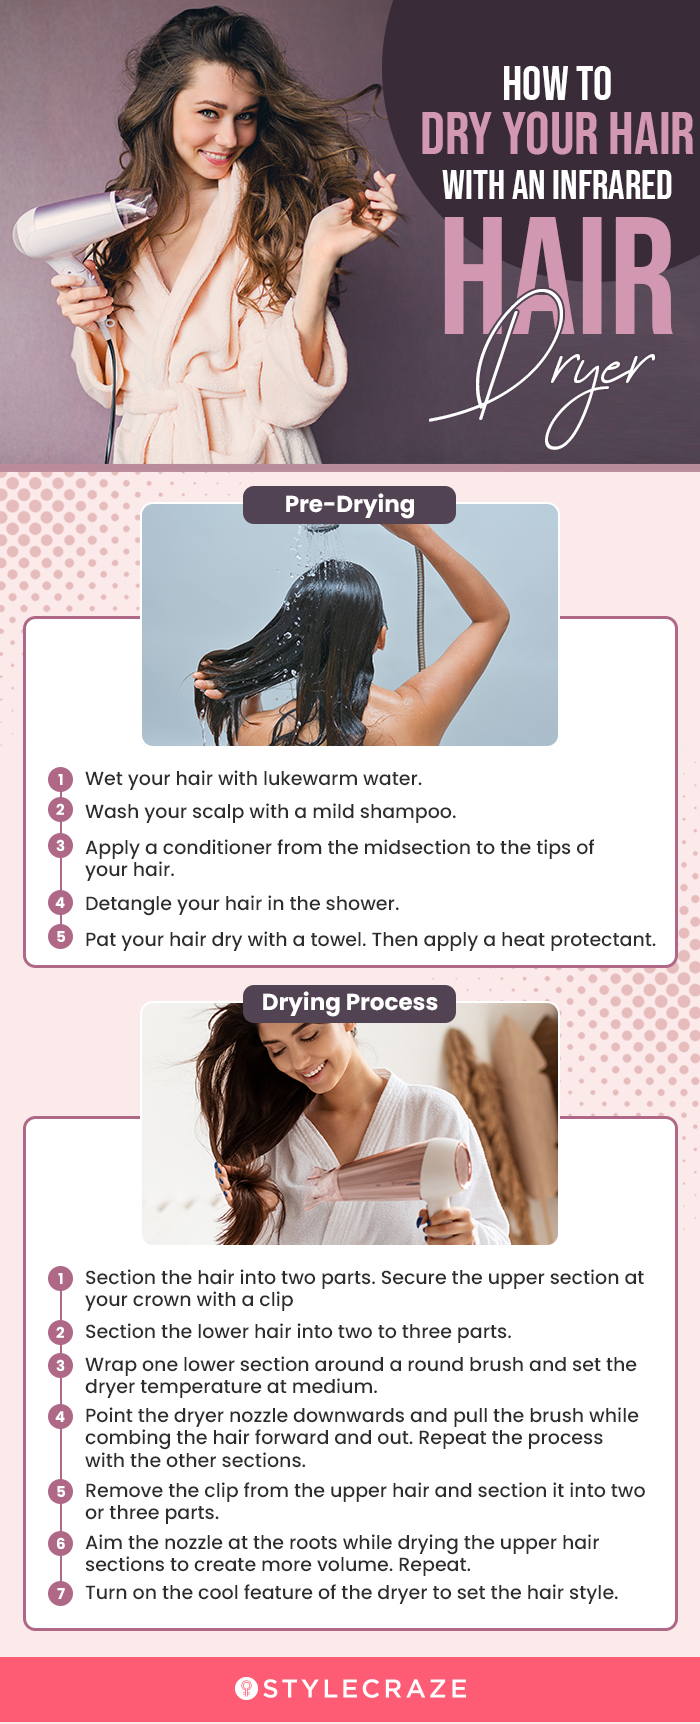 How To Dry Your Hair With A Infrared Hair Dryer (infographic)